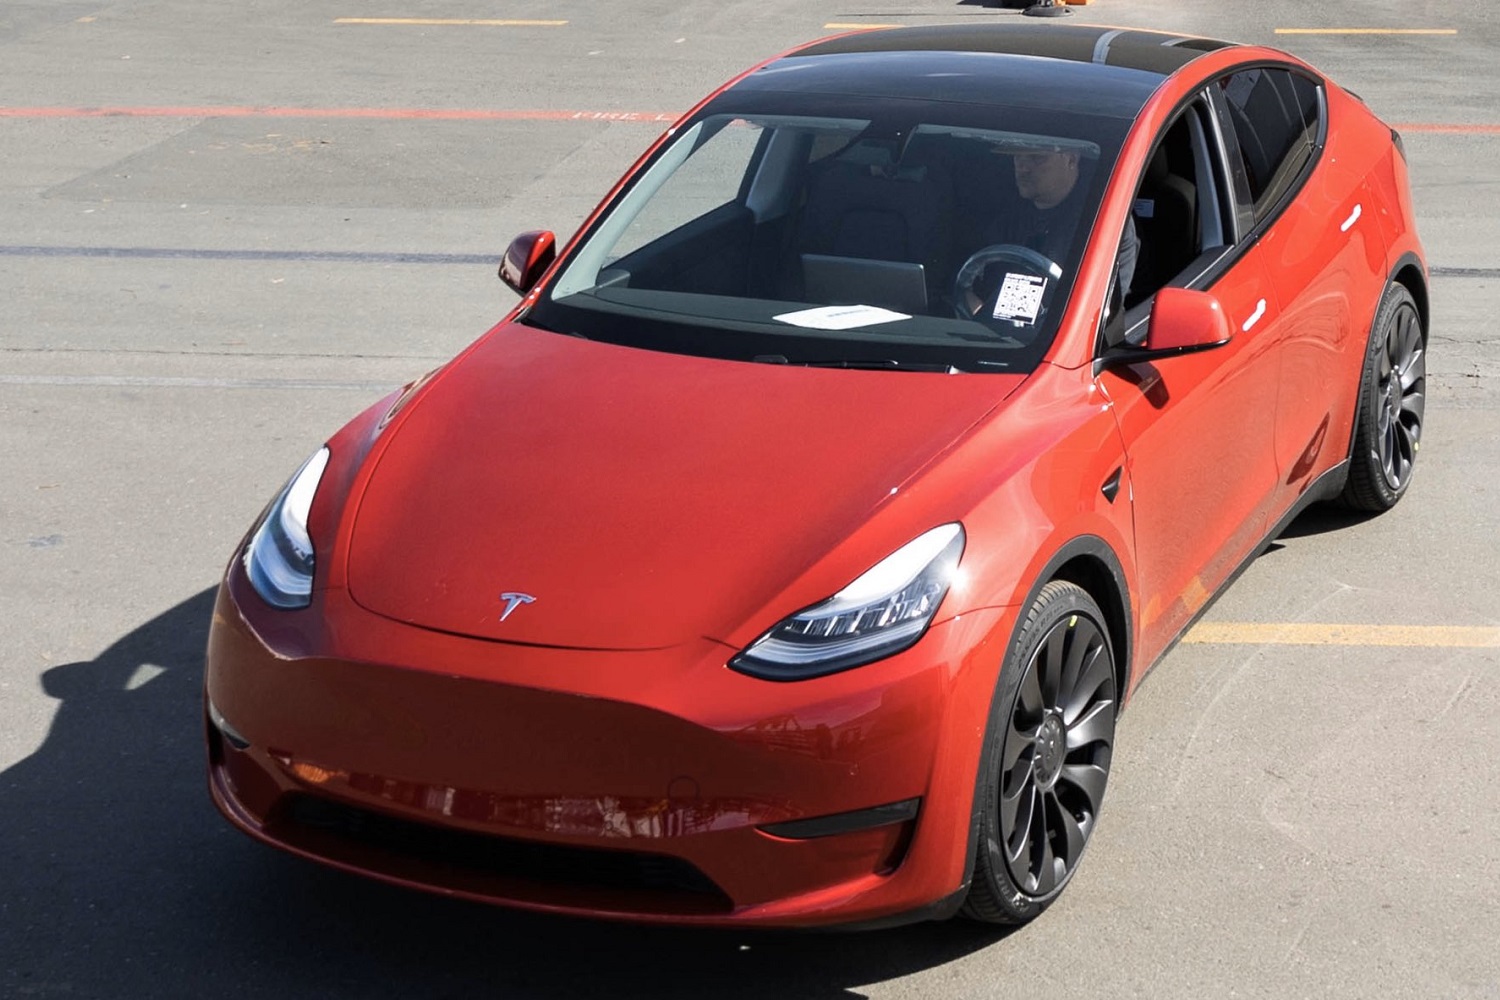 OPINION: Does Tesla need a new Model Y? Maybe, but not right now